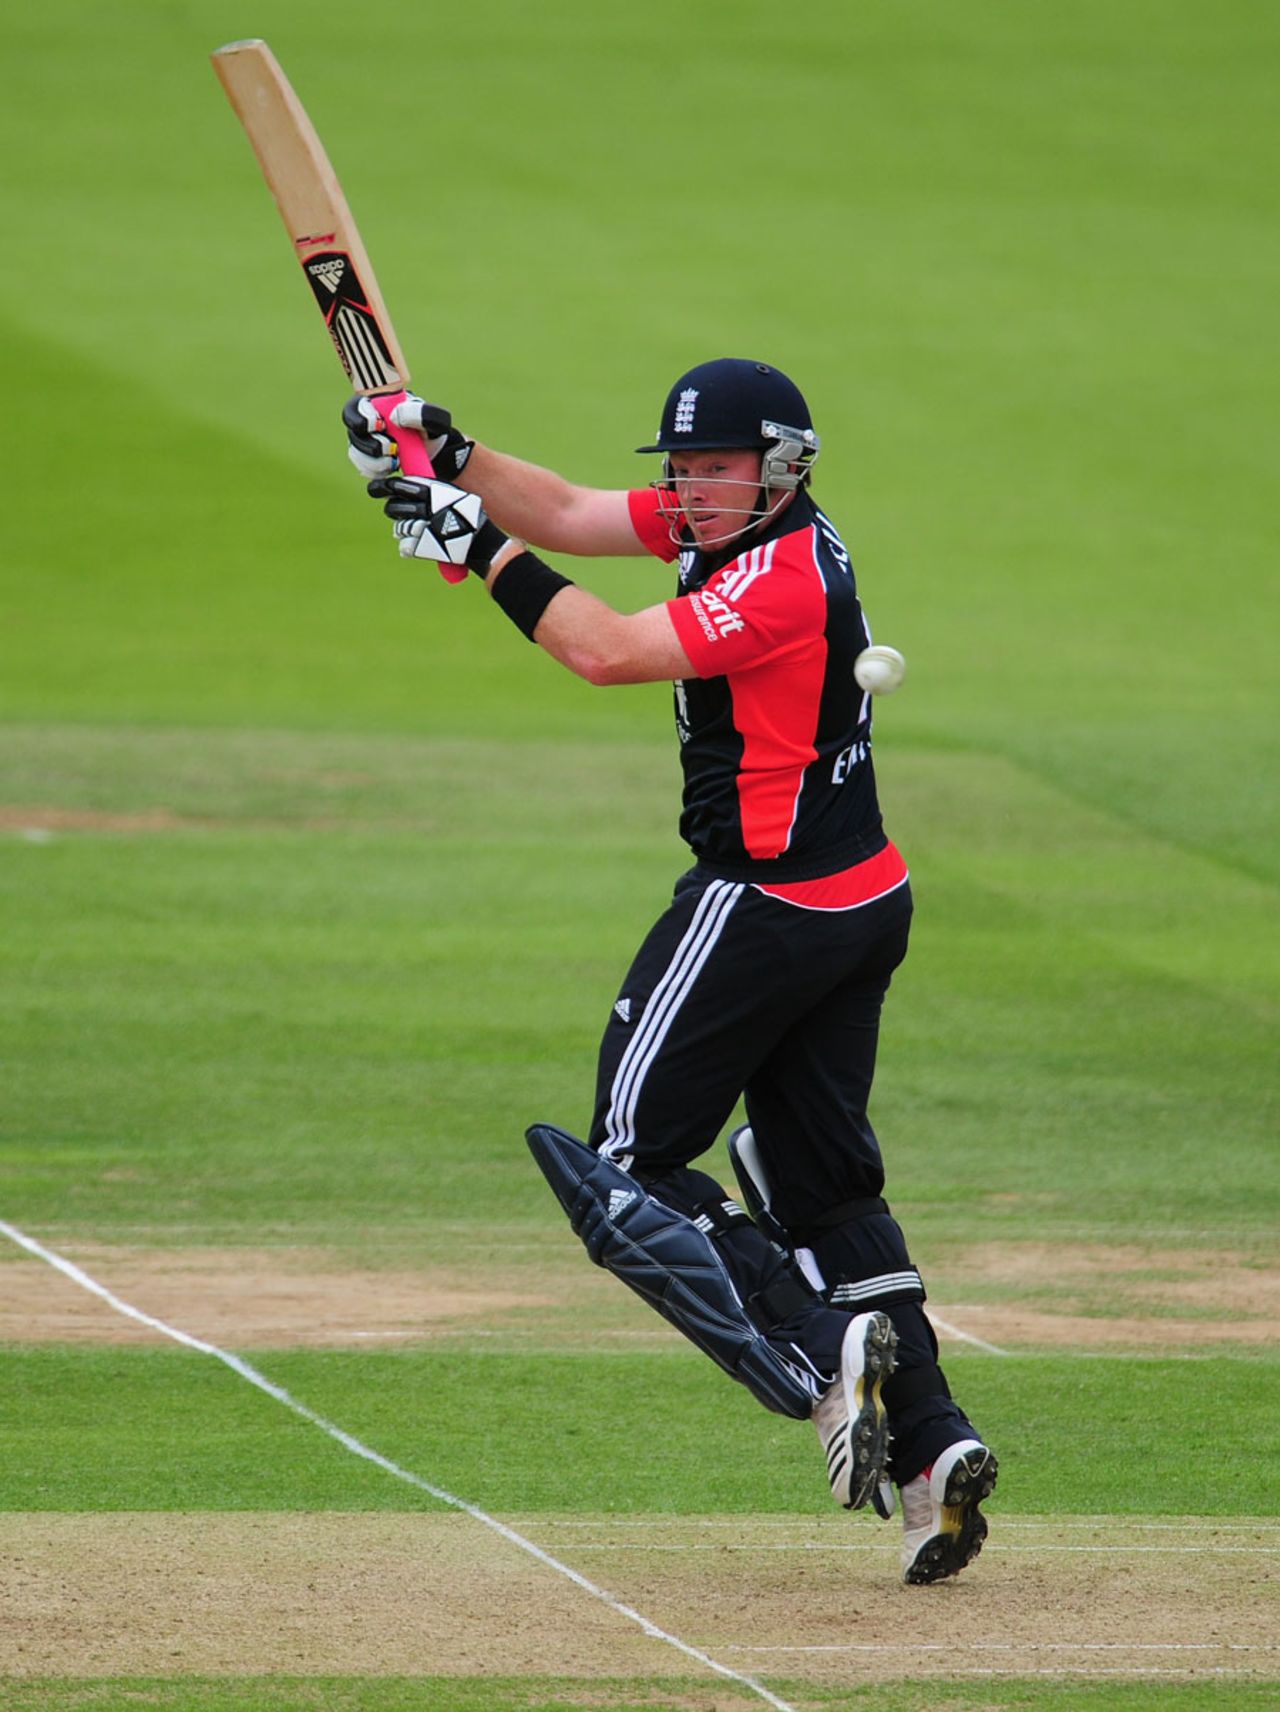 Ian Bell pulls during his innings of 30 from 46 balls, England v Sri Lanka, 3rd ODI, Lord's July 3 2011